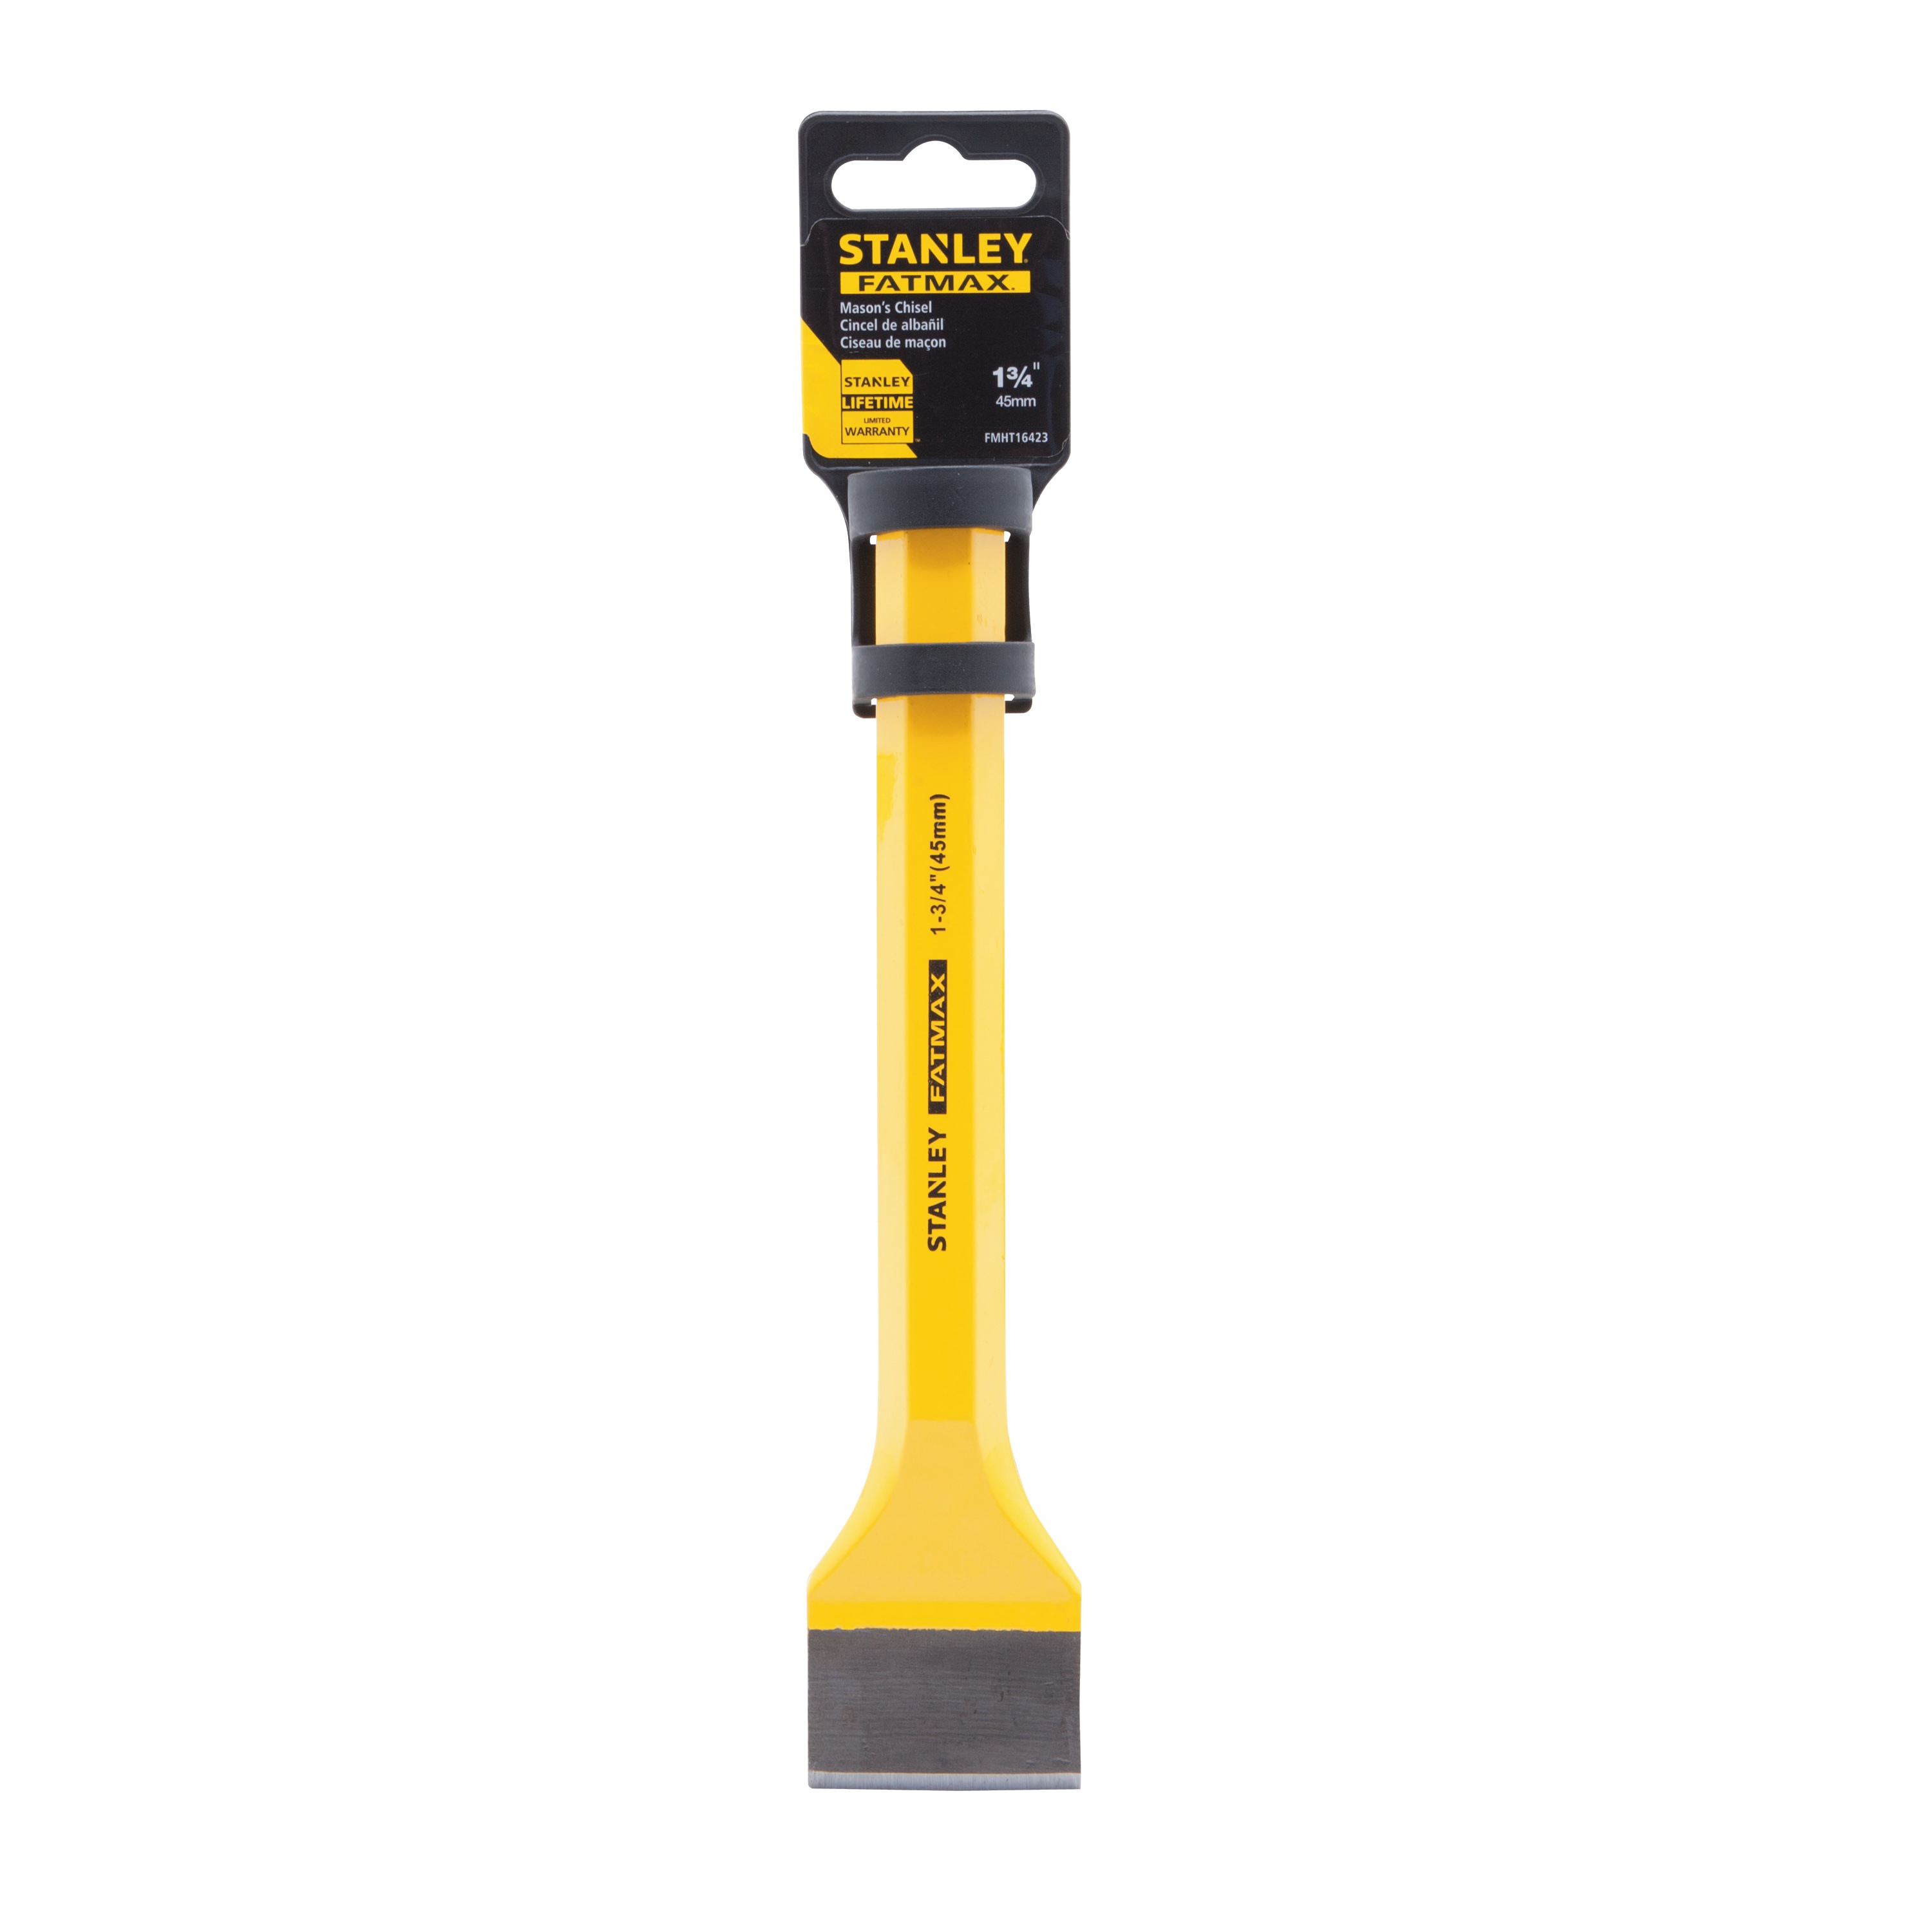 Stanley Tools - 134 in FATMAX Masons Chisel - FMHT16423